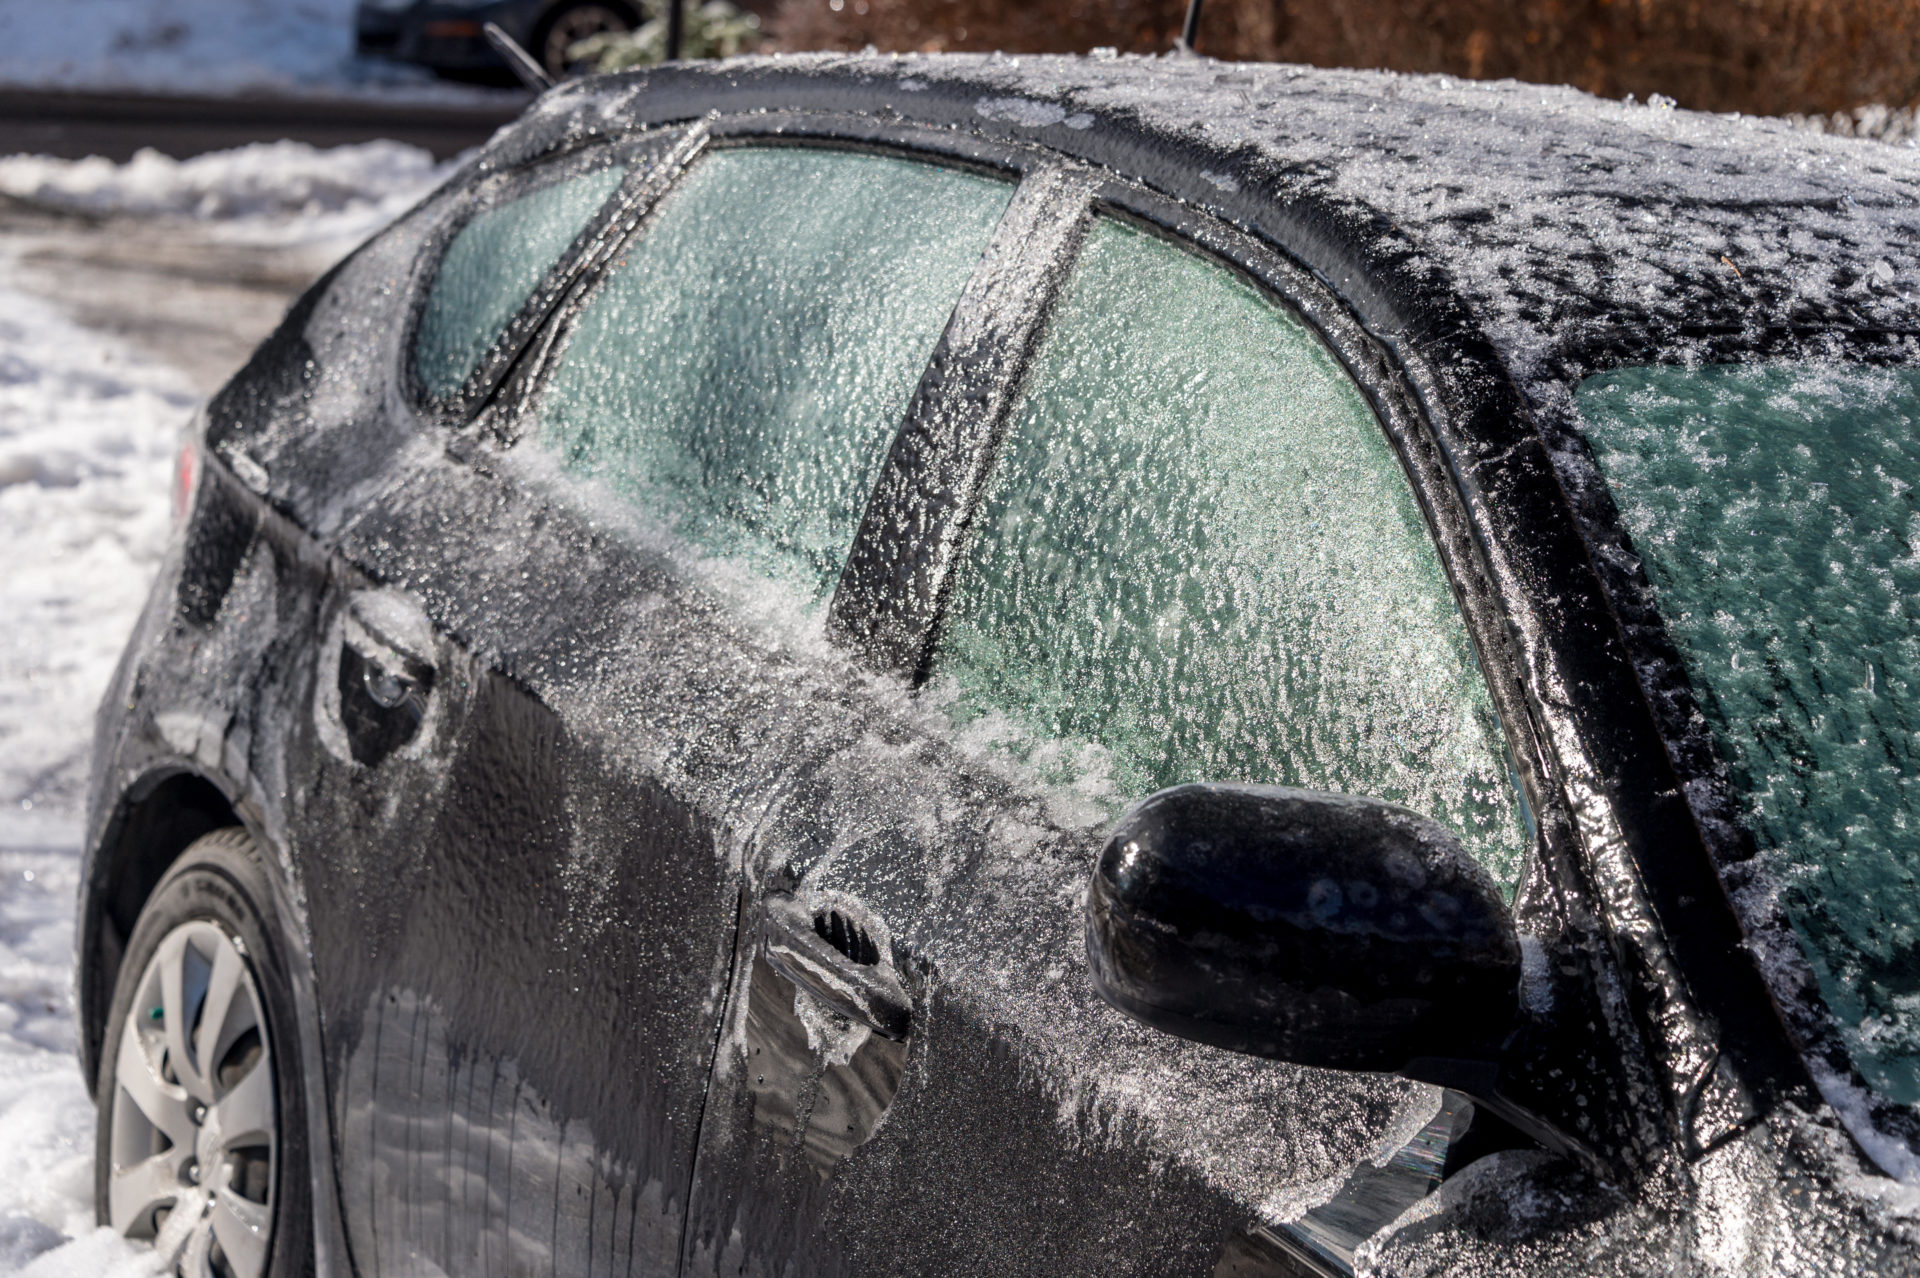 Thick layer of ice covering car after freezing rain Canada. Image: Marc Bruxelle / Alamy